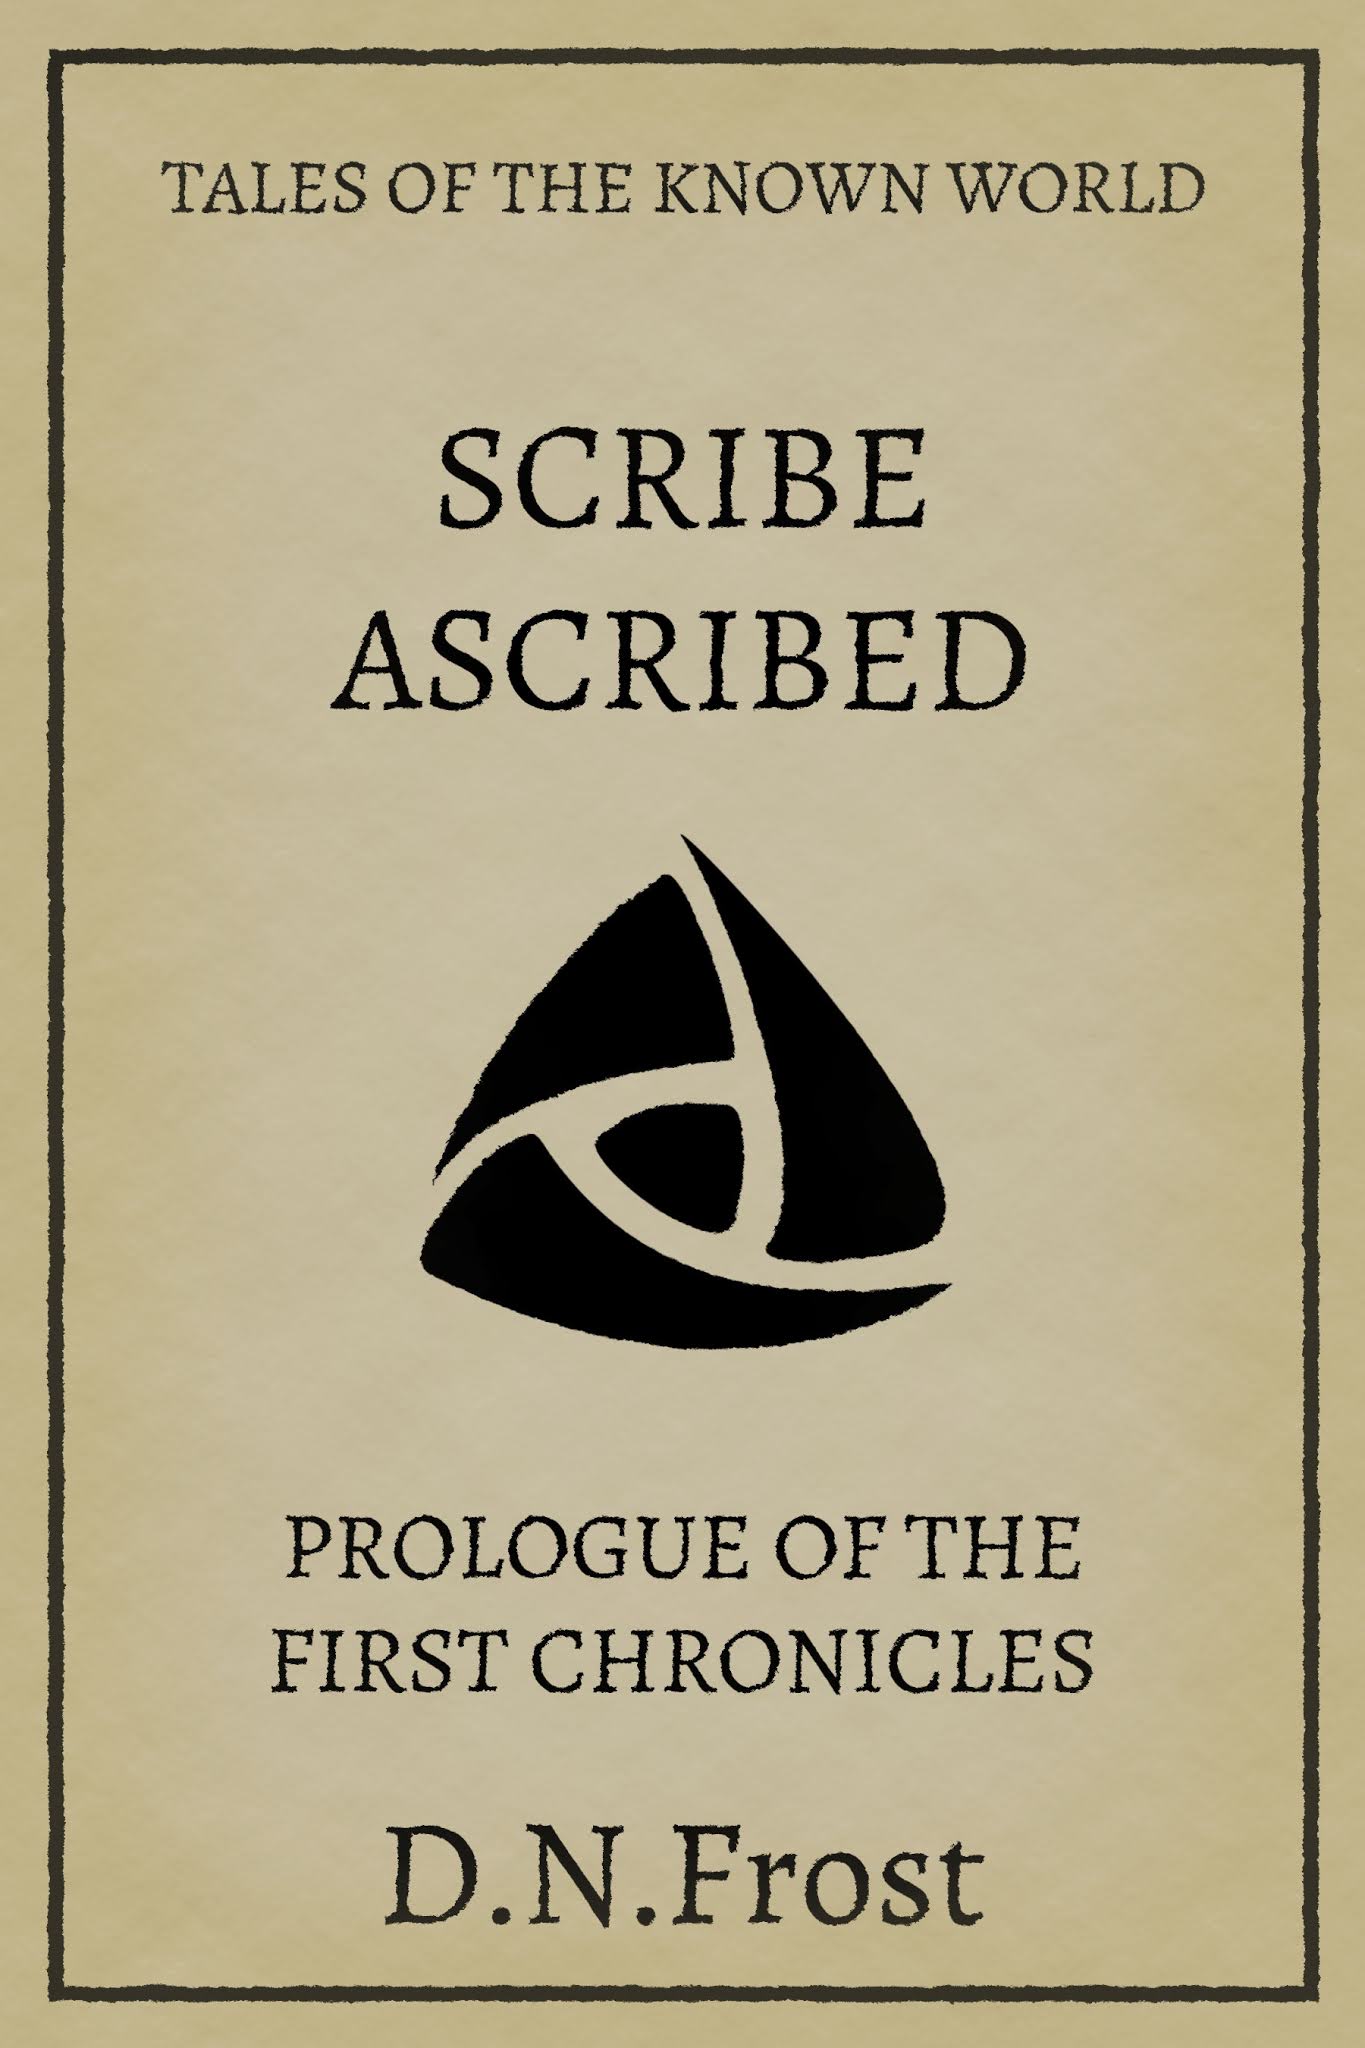 Scribe Ascribed: free prologue of the First Chronicles www.DNFrost.com/Prologue1 #TotKW An exclusive prologue by D.N.Frost @DNFrost13 Part 1 of a series.